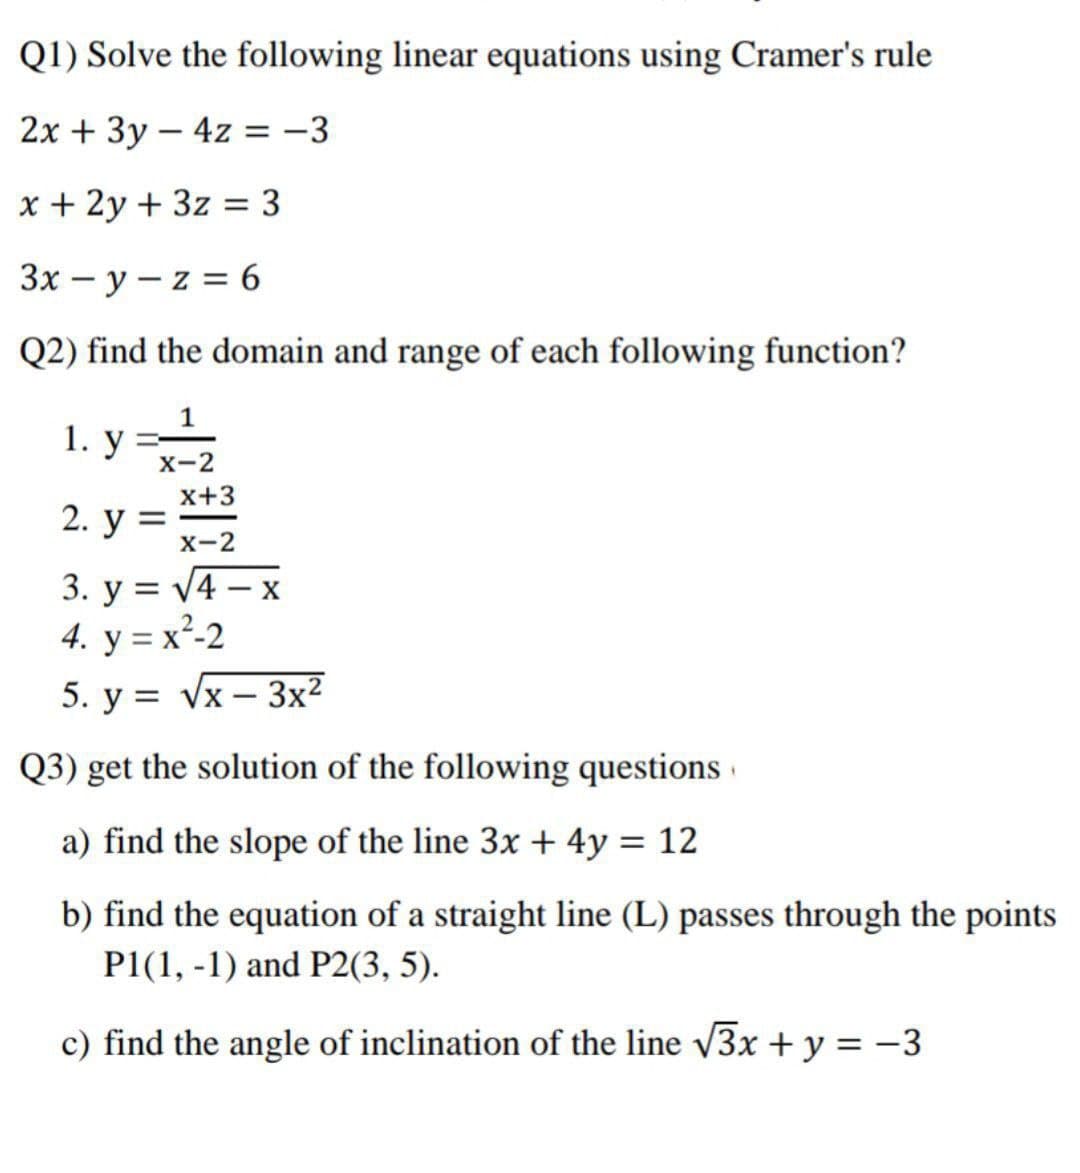 Q1) Solve the following linear equations using Cramer's rule
2х + 3у — 4z %3D —3
|
x + 2y + 3z = 3
Зх — у — z %3D 6
Q2) find the domain and range of each following function?
1. y =-2
x+3
2. у %3
X-2
3. у %3D4-х
4. y = x²-2
5. y = Vx – 3x2
Q3) get the solution of the following questions ·
a) find the slope of the line 3x + 4y = 12
b) find the equation of a straight line (L) passes through the points
P1(1, -1) and P2(3, 5).
c) find the angle of inclination of the line 3x + y = -3
